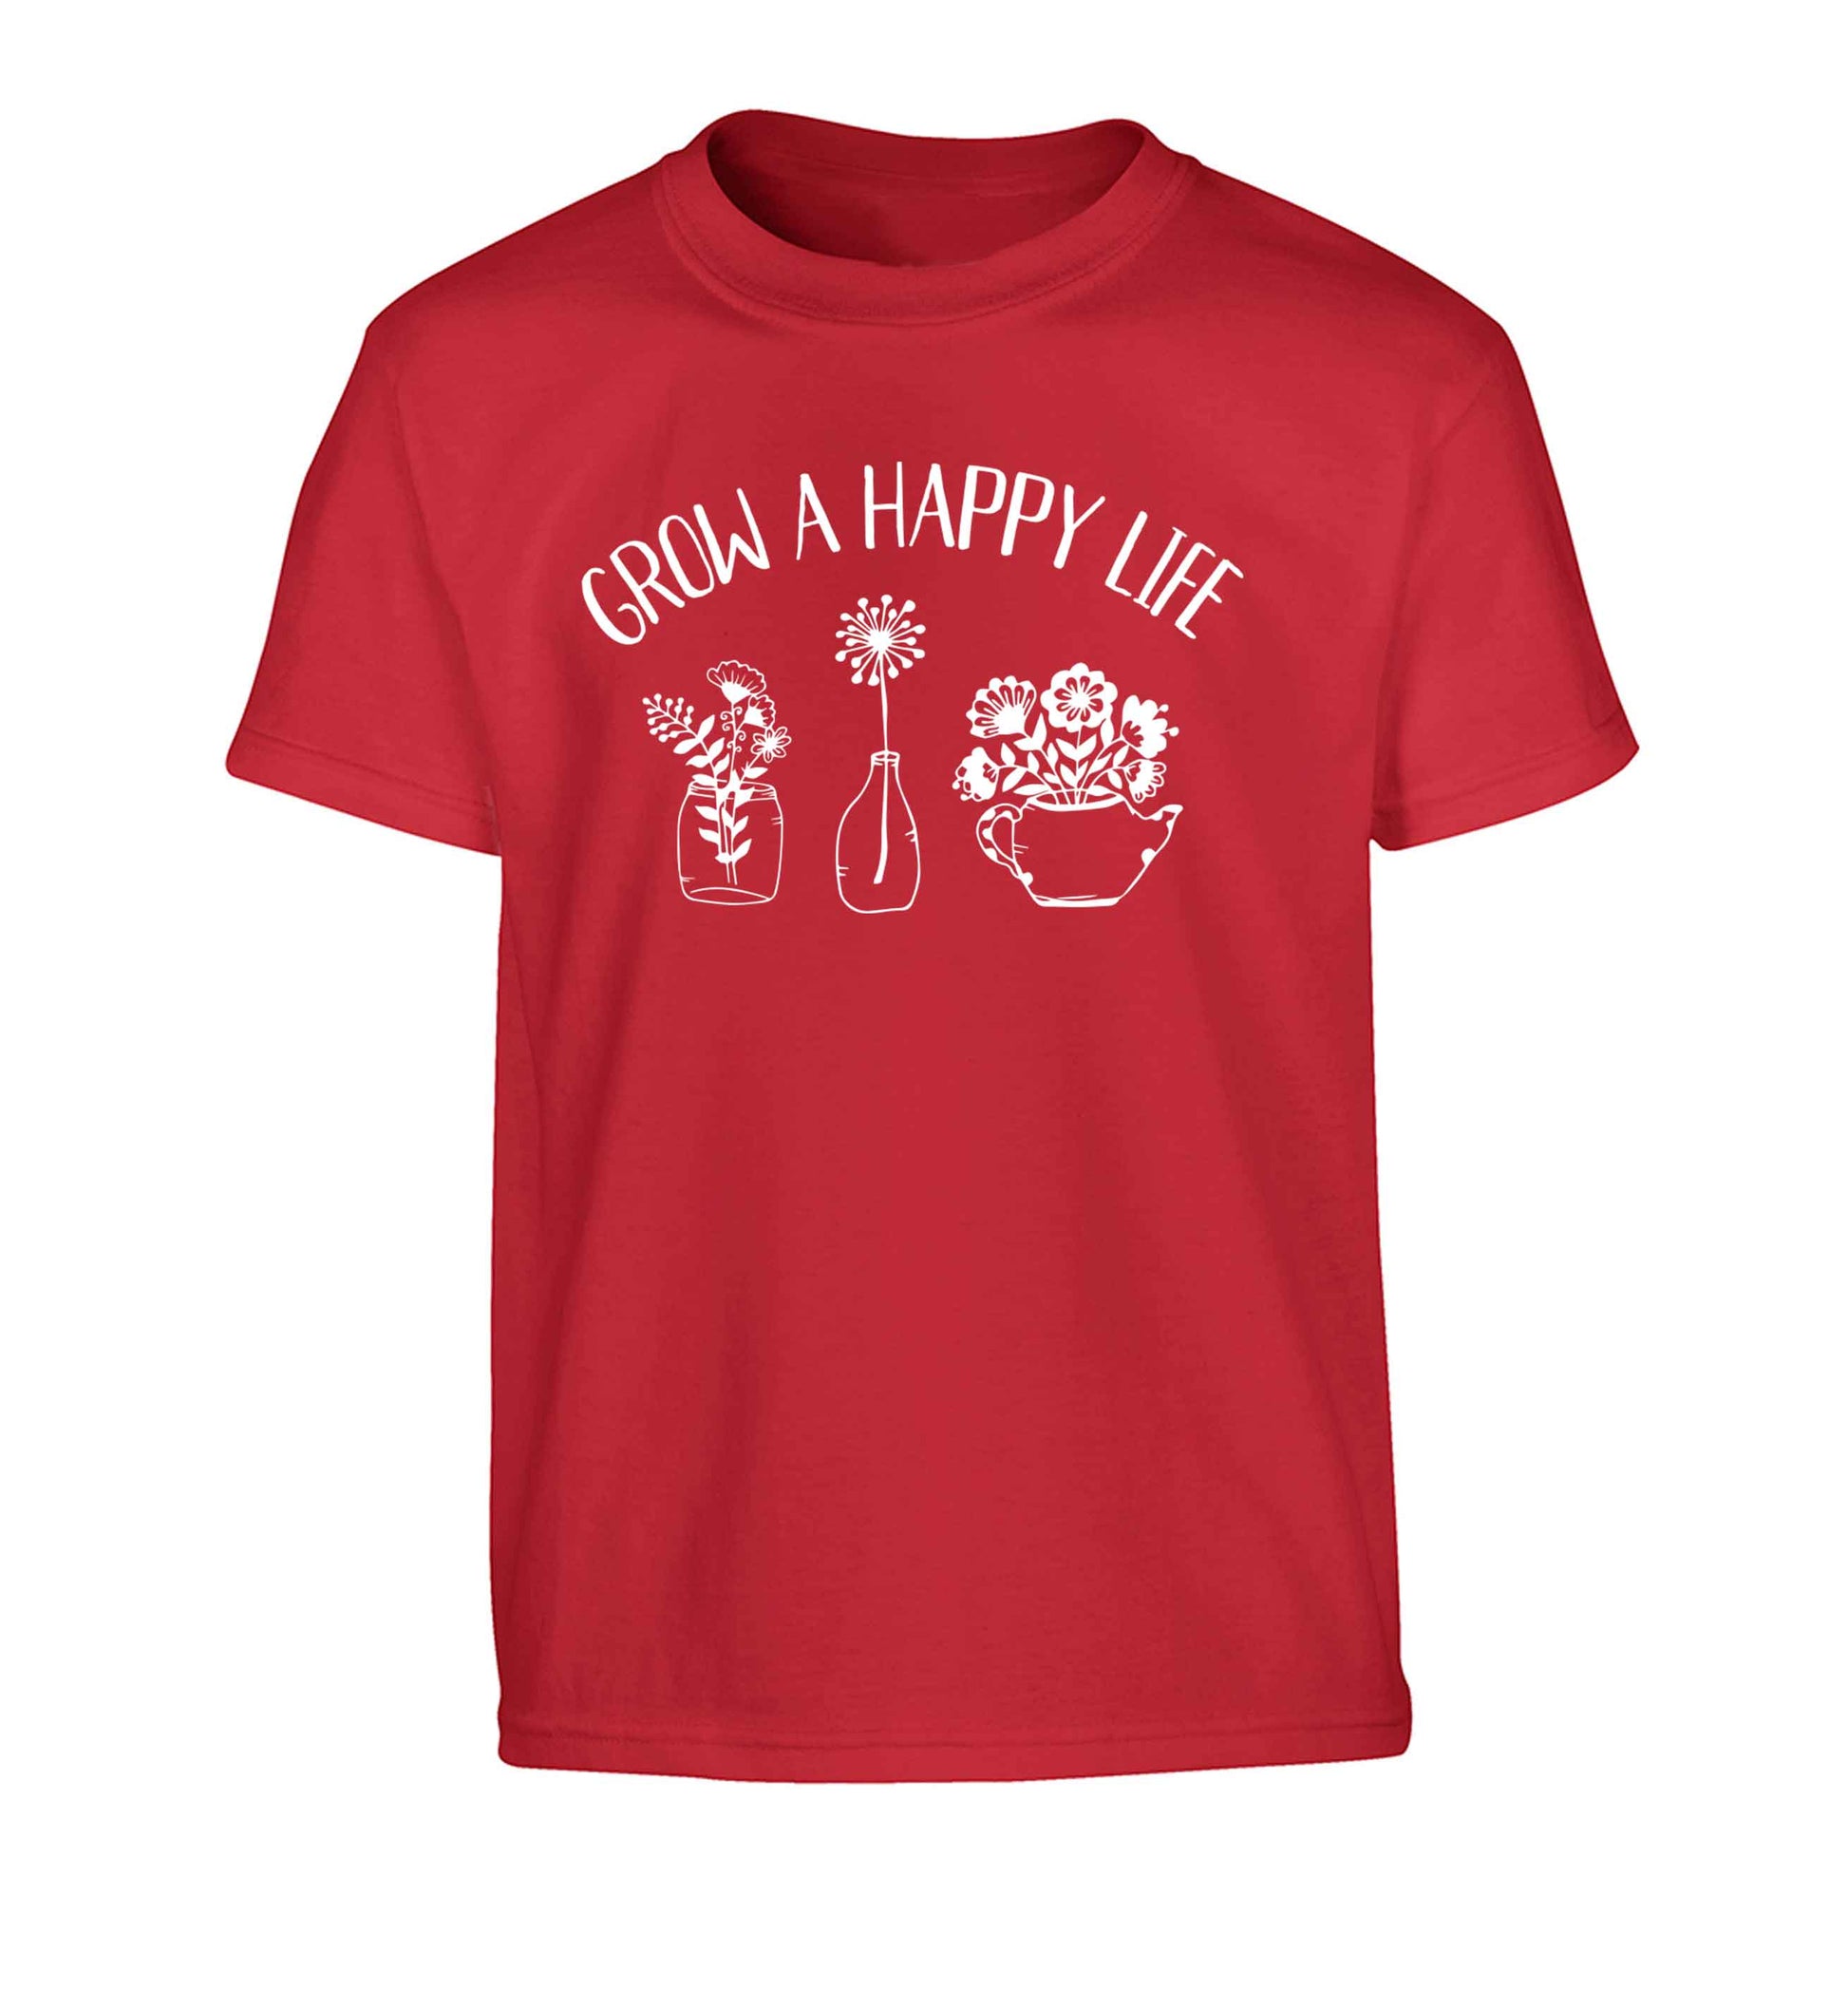 Grow a happy life Children's red Tshirt 12-13 Years